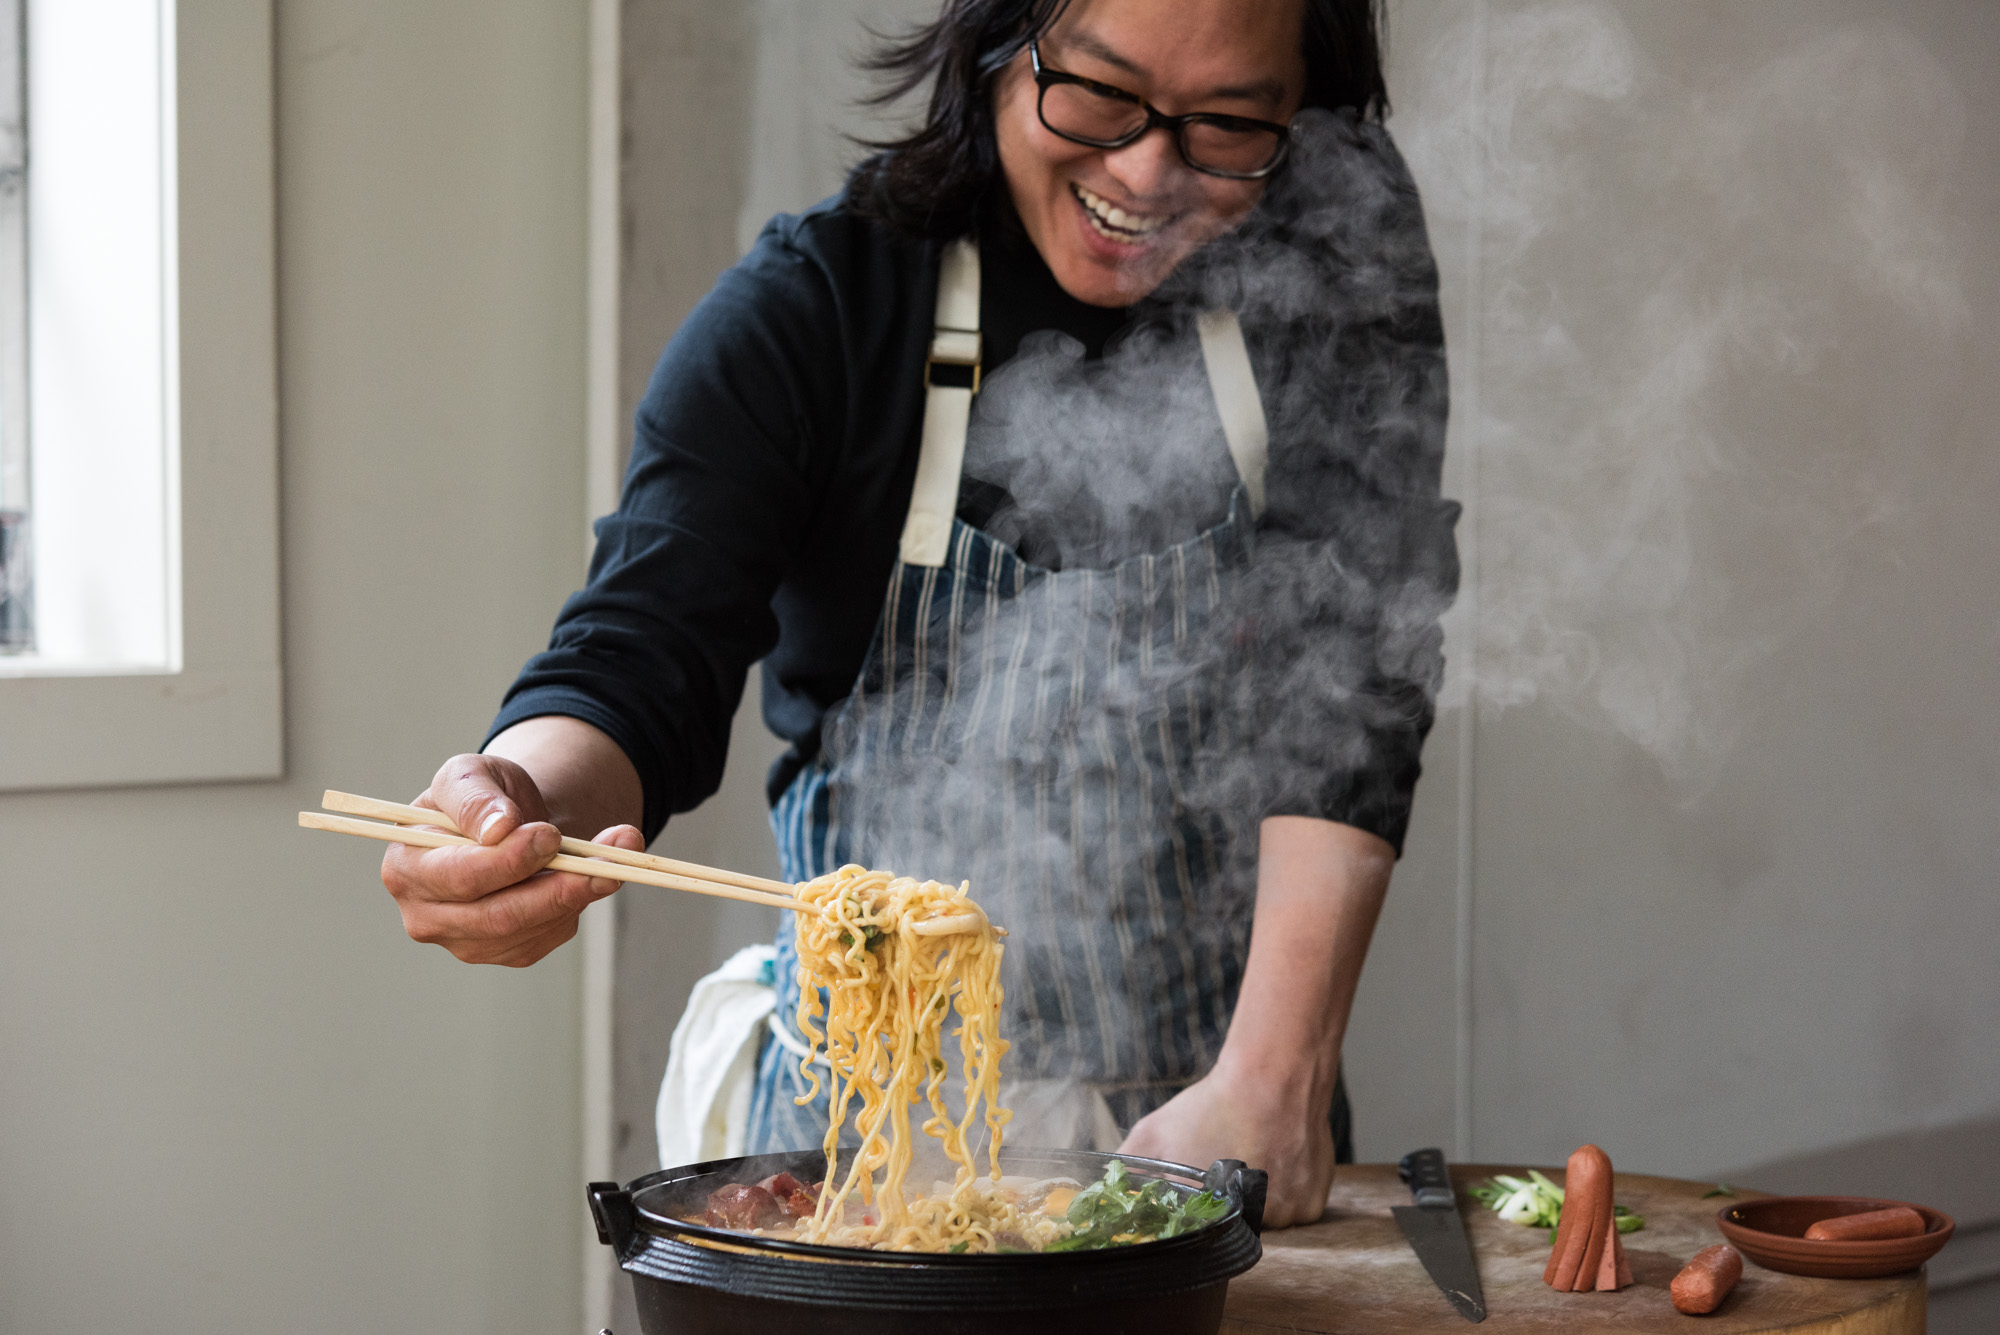 Peter Cho of Han Oak pulls noodles from a skillet.